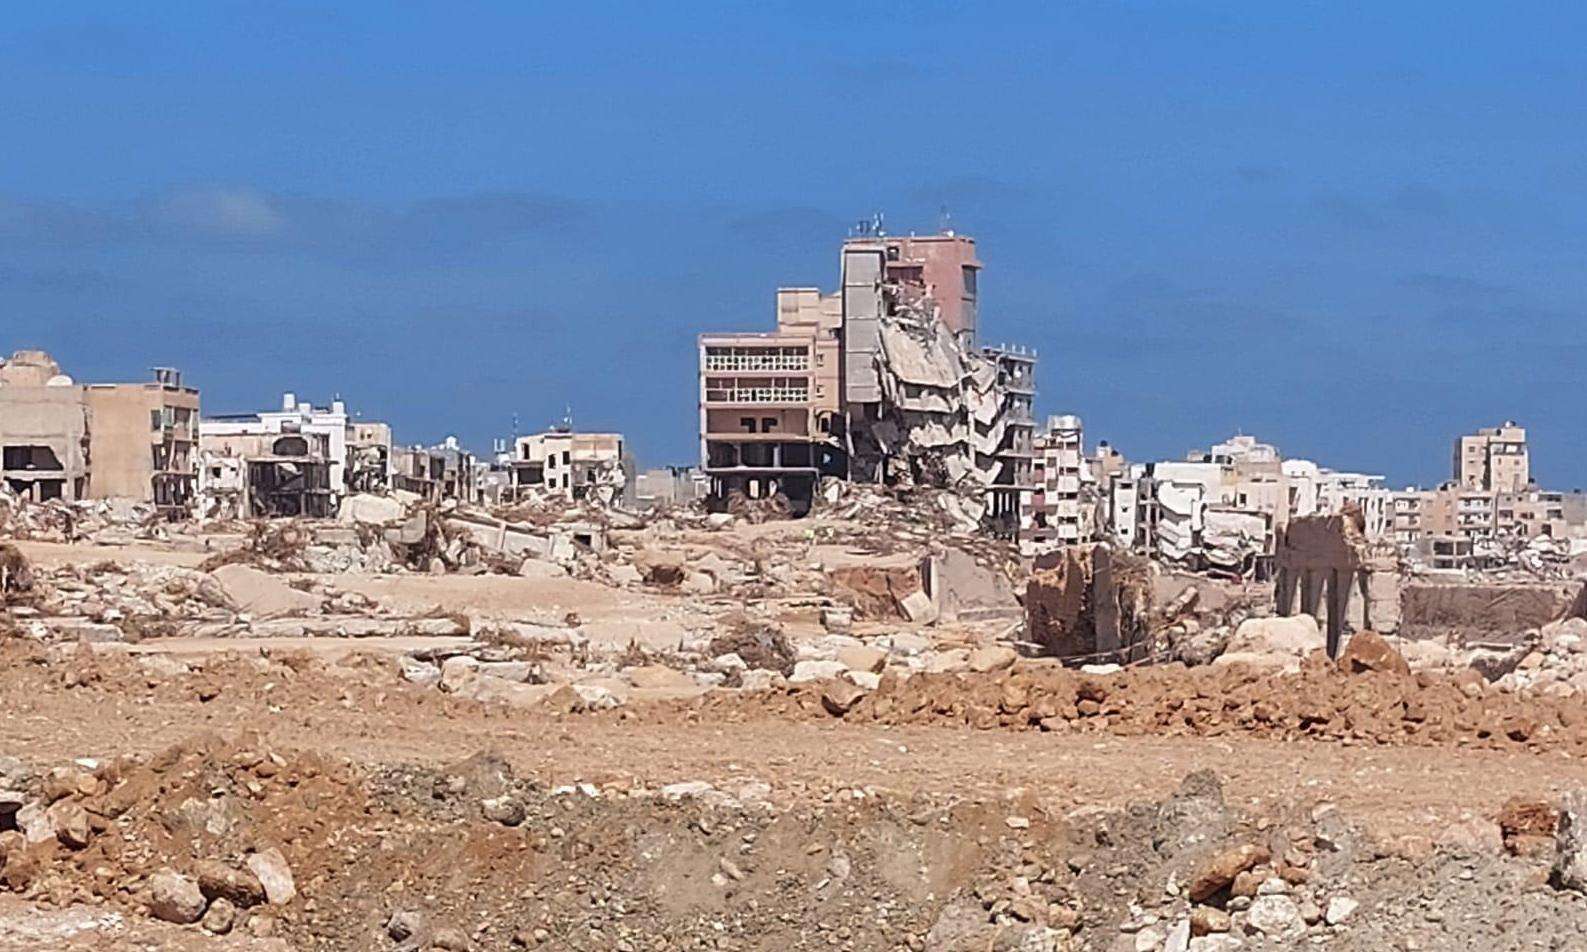 Crumbled cement buildings in a desert area of Derna where MSF is preparing further activities.